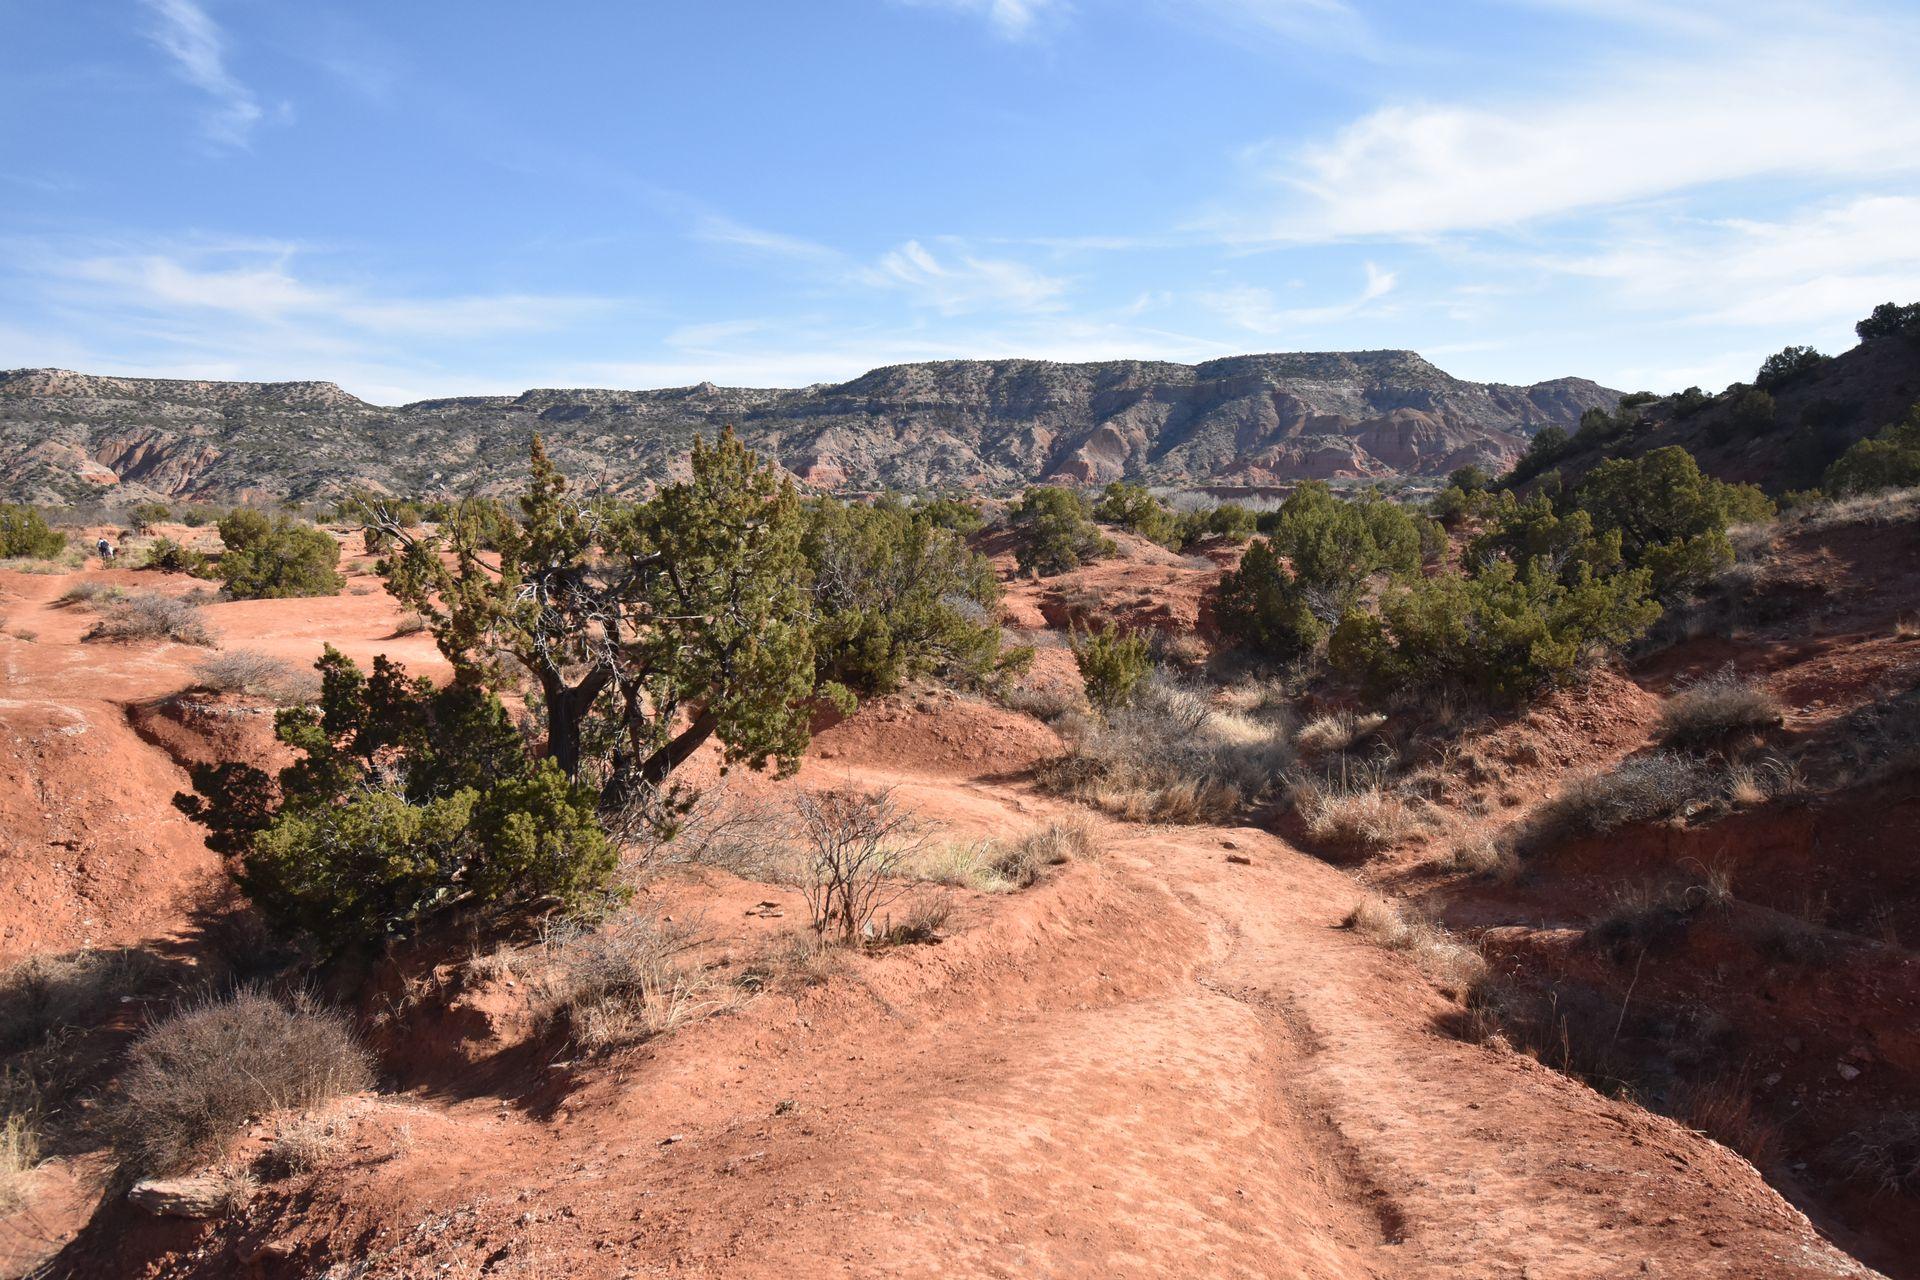 A sandy orange ground with canyon walls in the distance in Palo Duro Canyon State Park